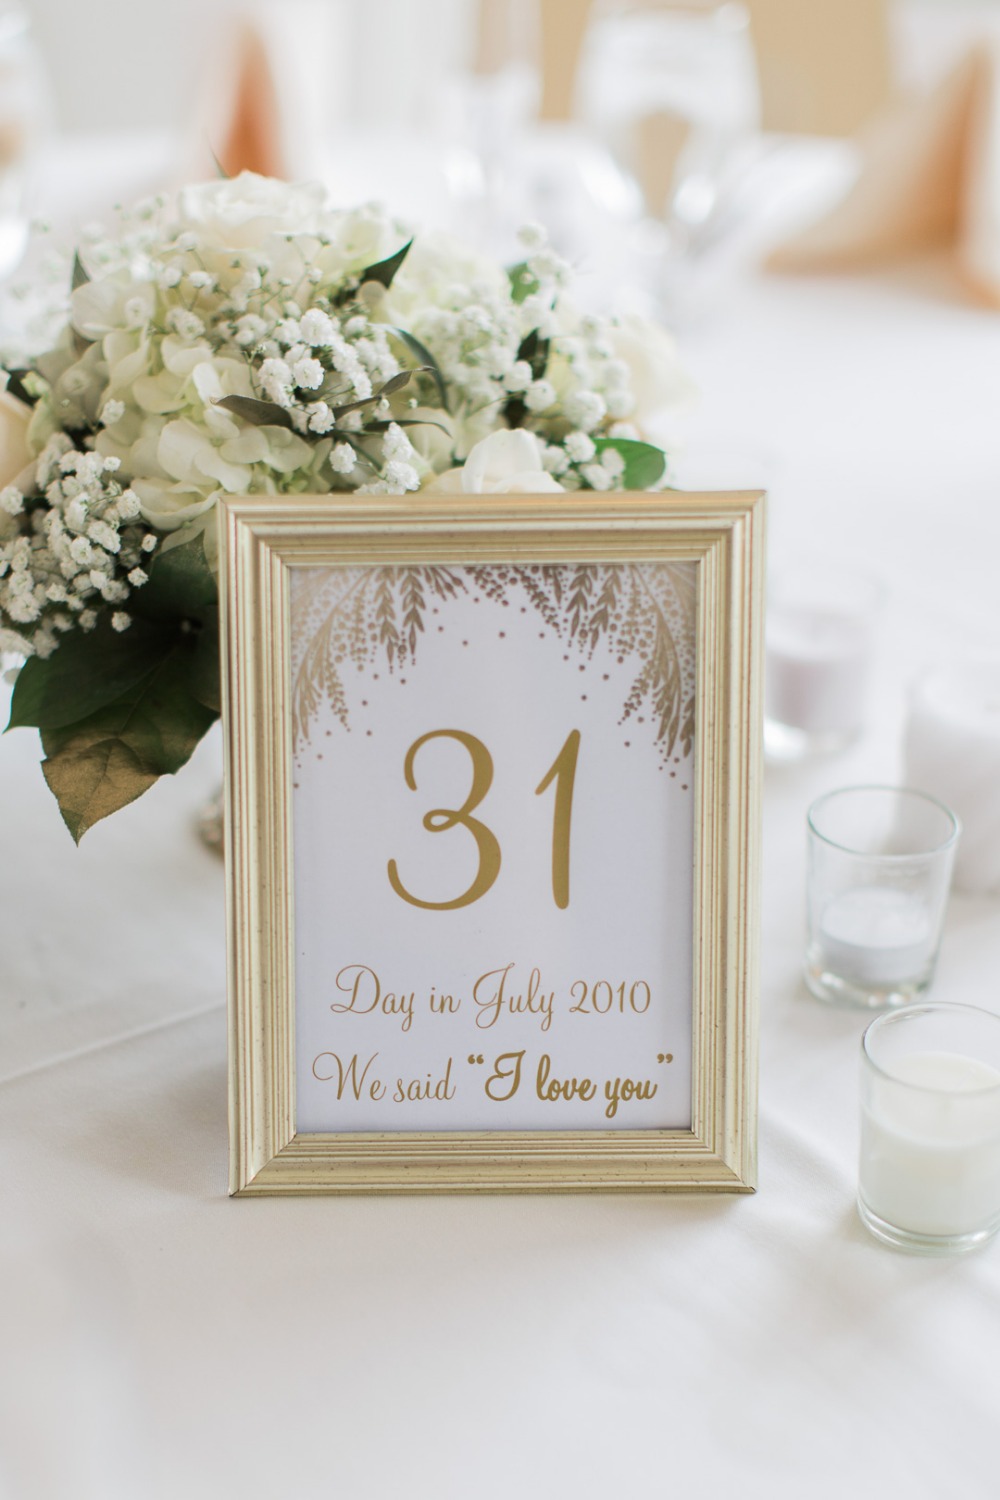 White and gold table number